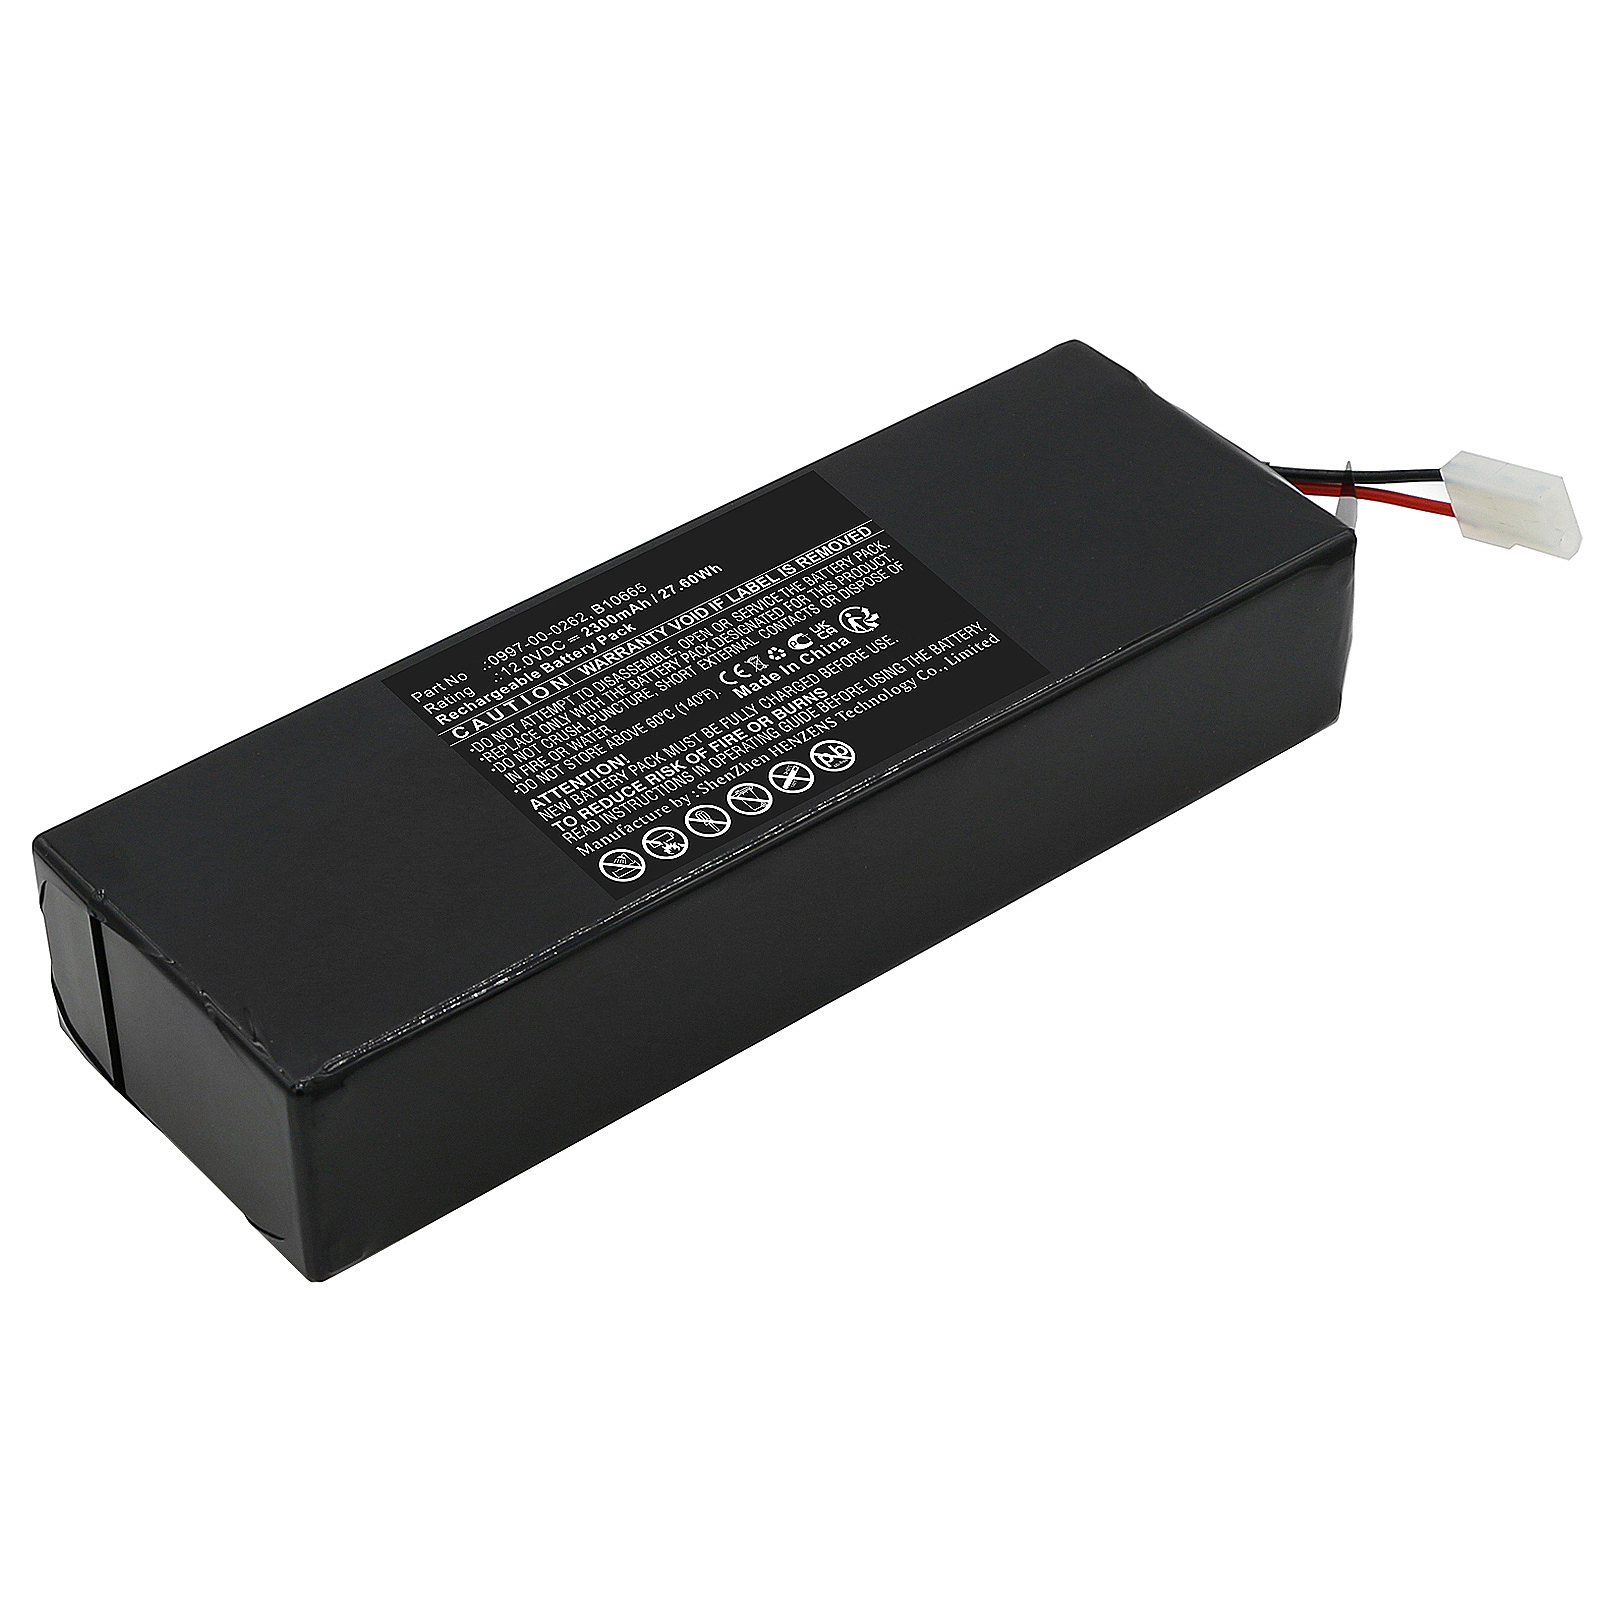 Synergy Digital Medical Battery, Compatible with Datascope  0997-00-0262 Medical Battery (Sealed Lead Acid, 12V, 2300mAh)